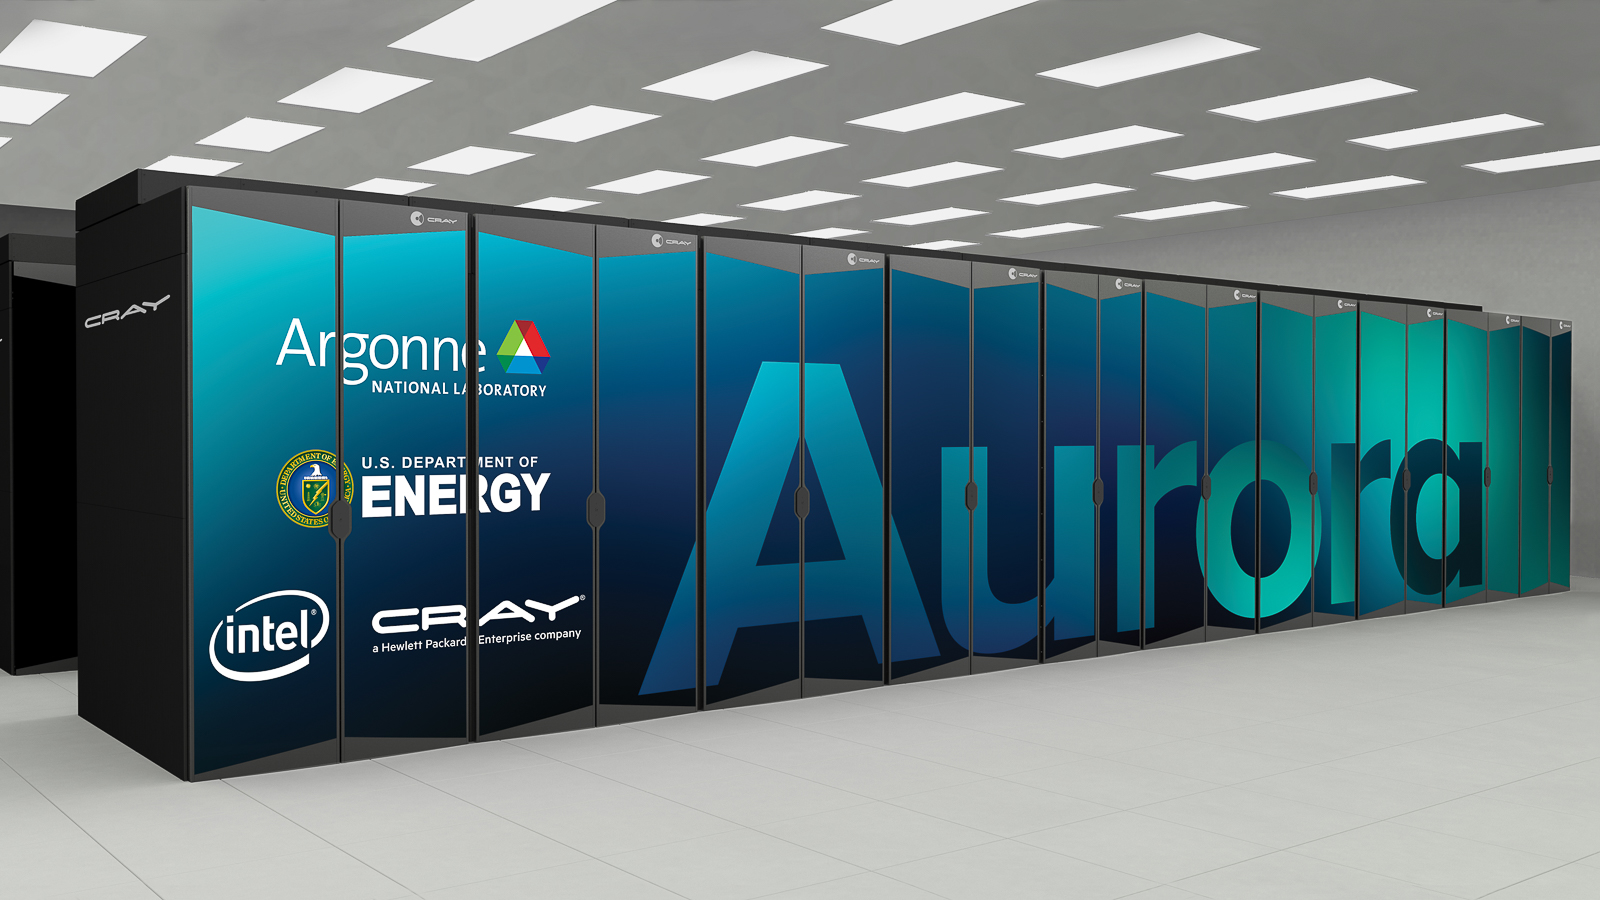 Alessandro Lovato will leverage forthcoming exascale computing resources, including Argonne’s Aurora — set to be deployed in 2021 — to foster our understanding of atomic nuclei. (Image by Argonne National Laboratory.)